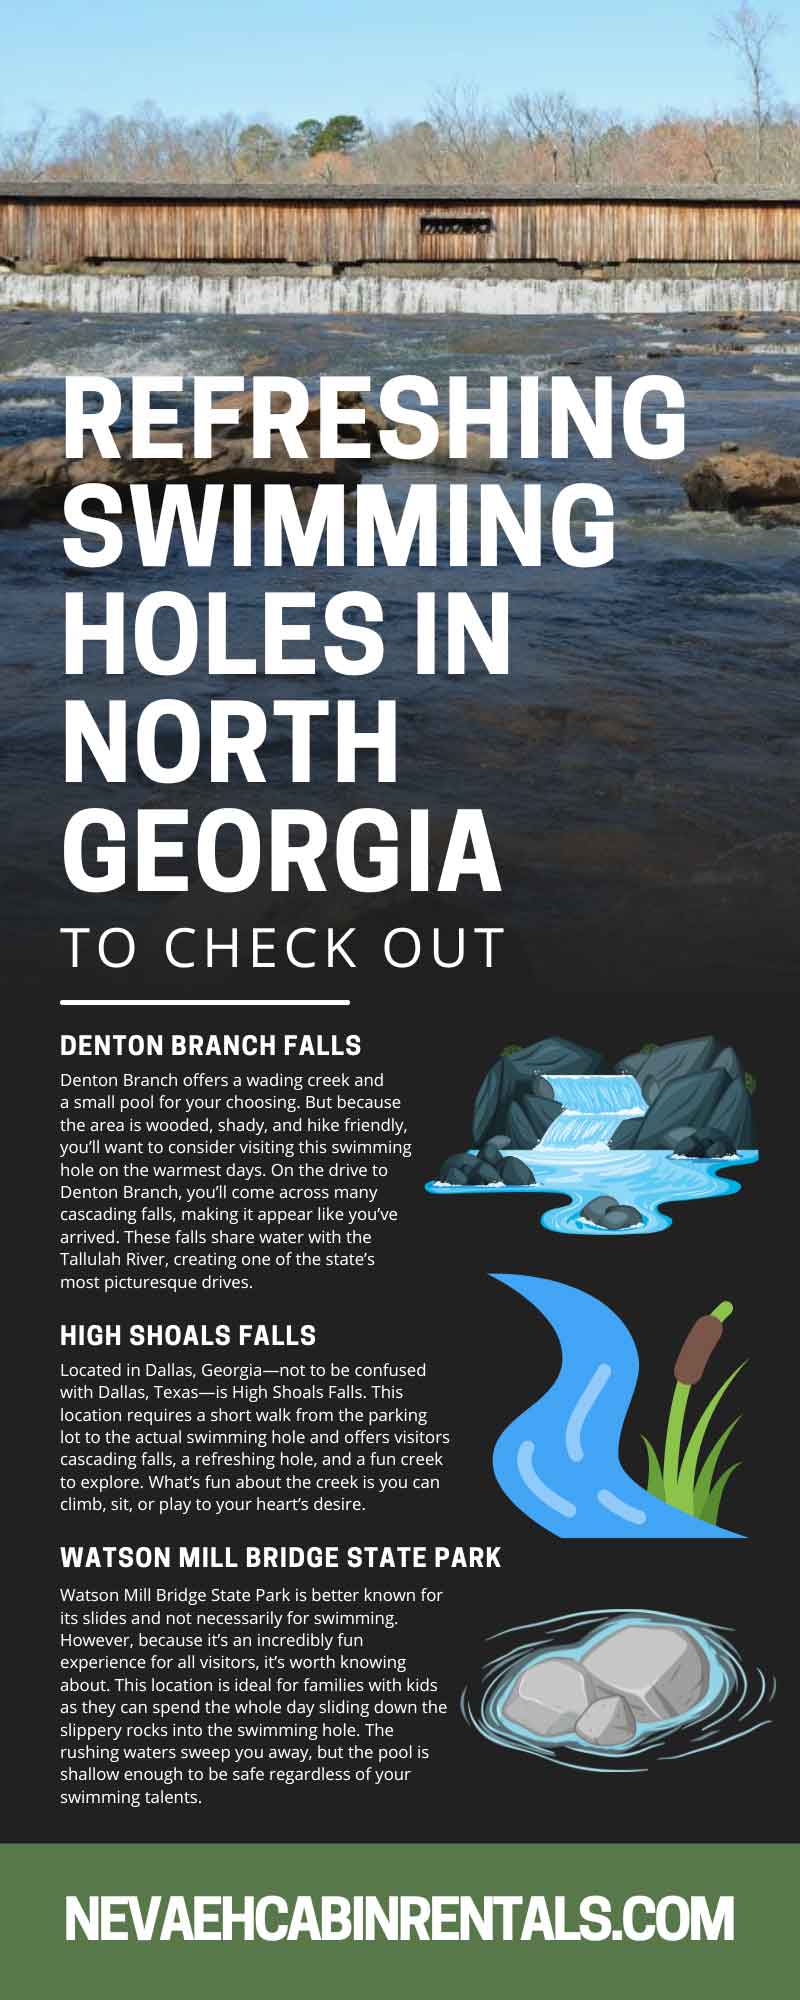 8 Refreshing Swimming Holes in North Georgia To Check Out